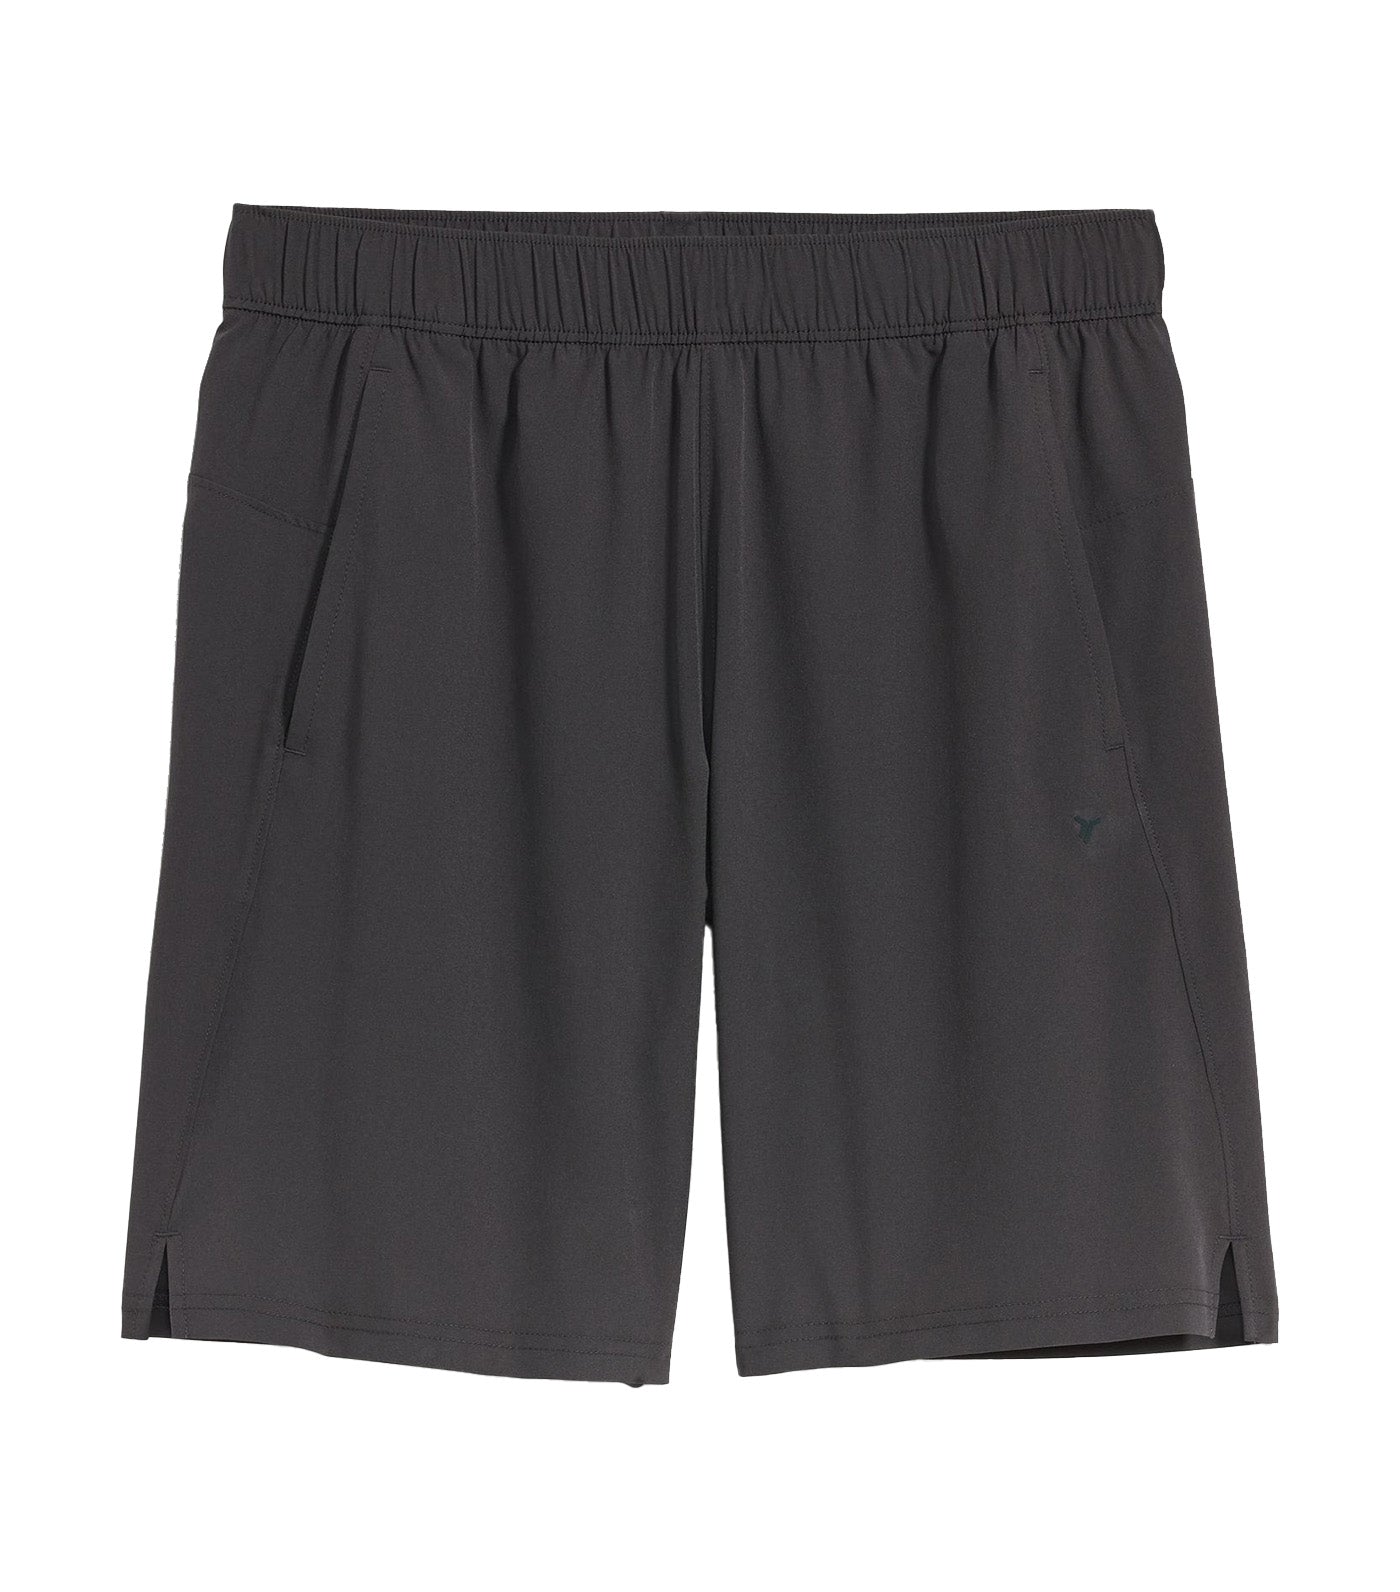 Essential Woven Workout Shorts for Men 9-inch Inseam Panther